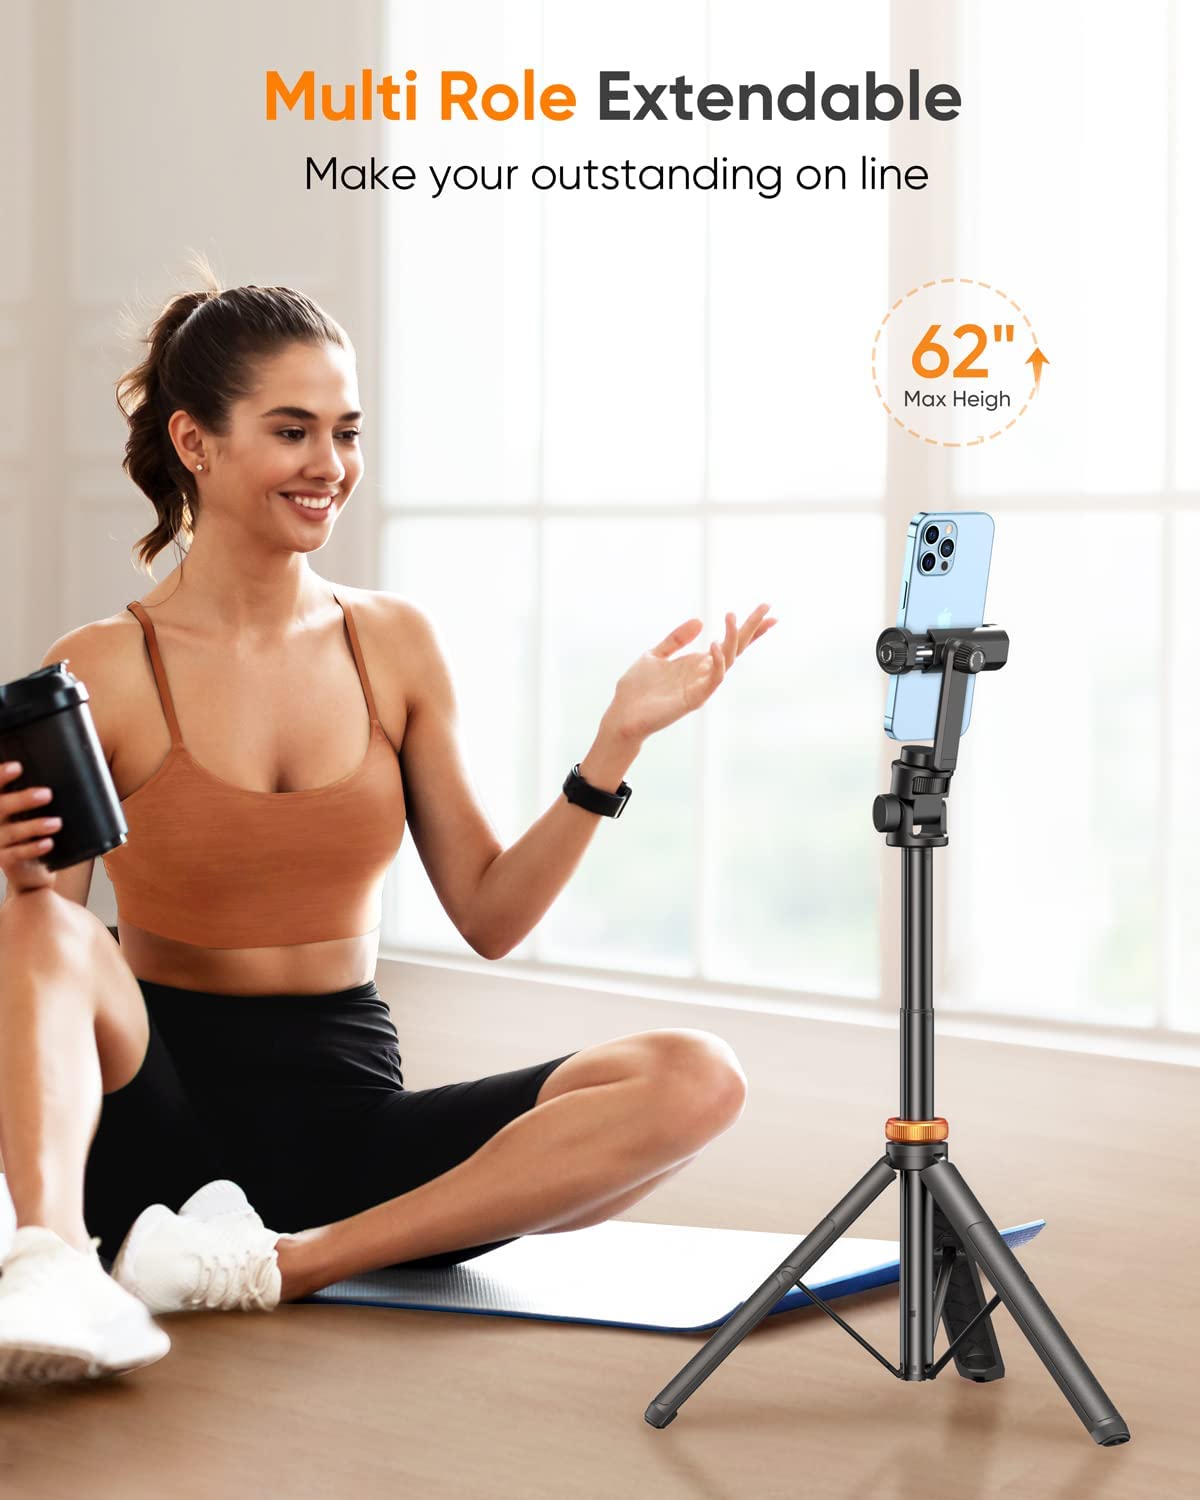 Tripod extendable up to 62 inches for phones